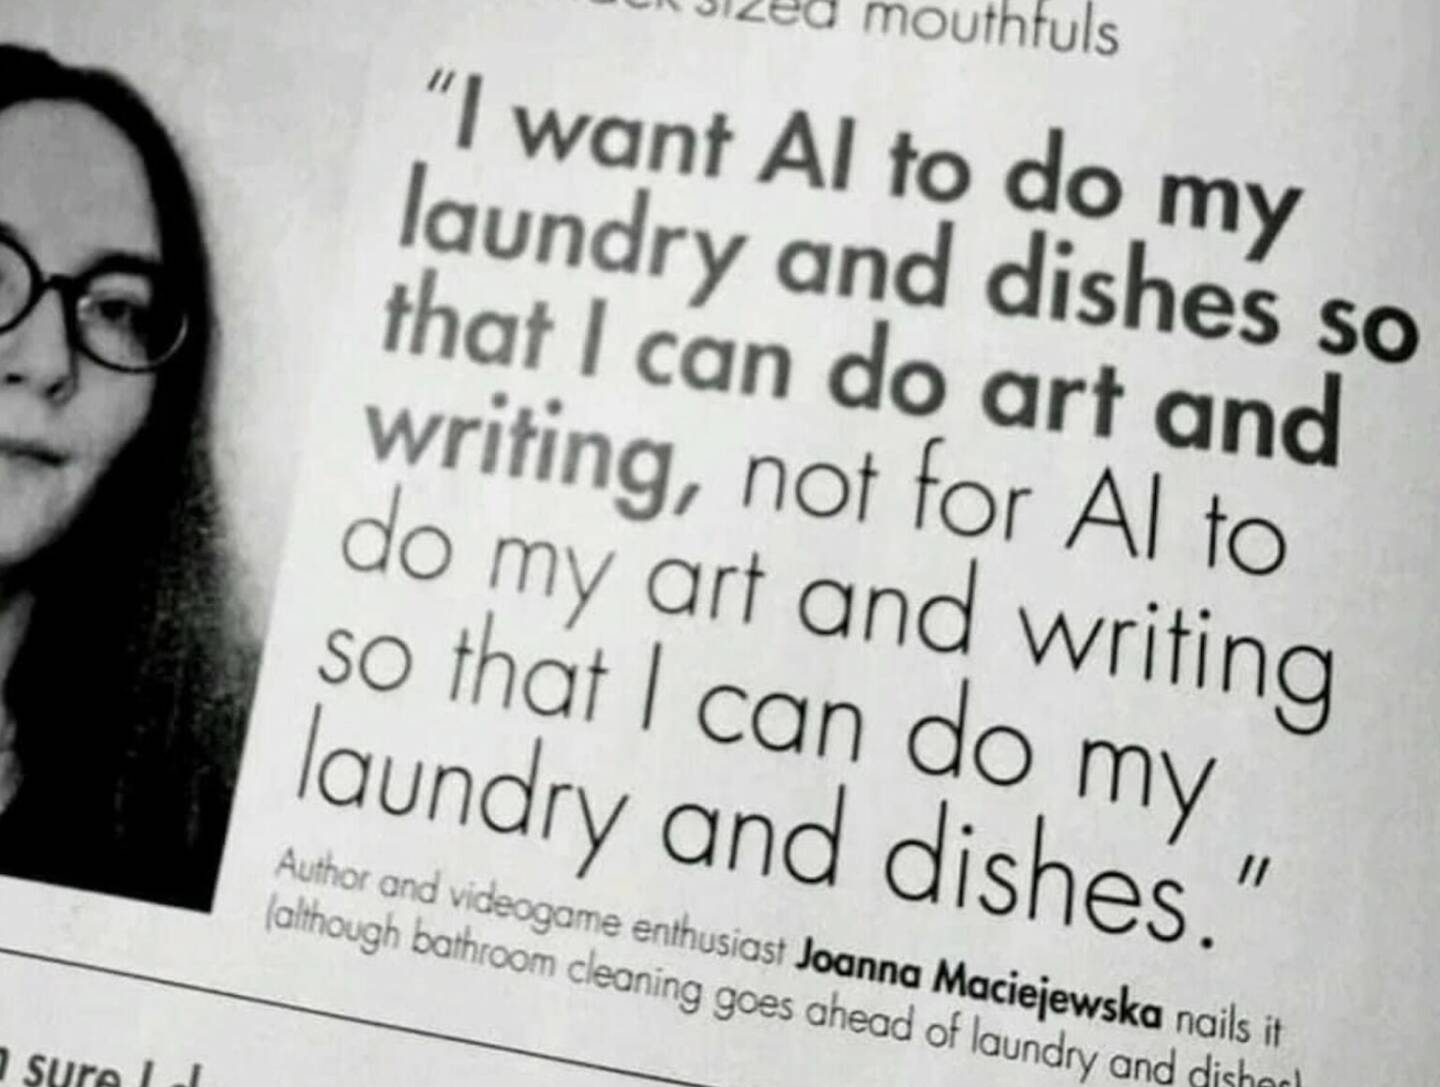 I want AI to do my laundry and dishes so that I can do art and writing, not for AI to do my art and writing so that I can do my laundry and dishes.